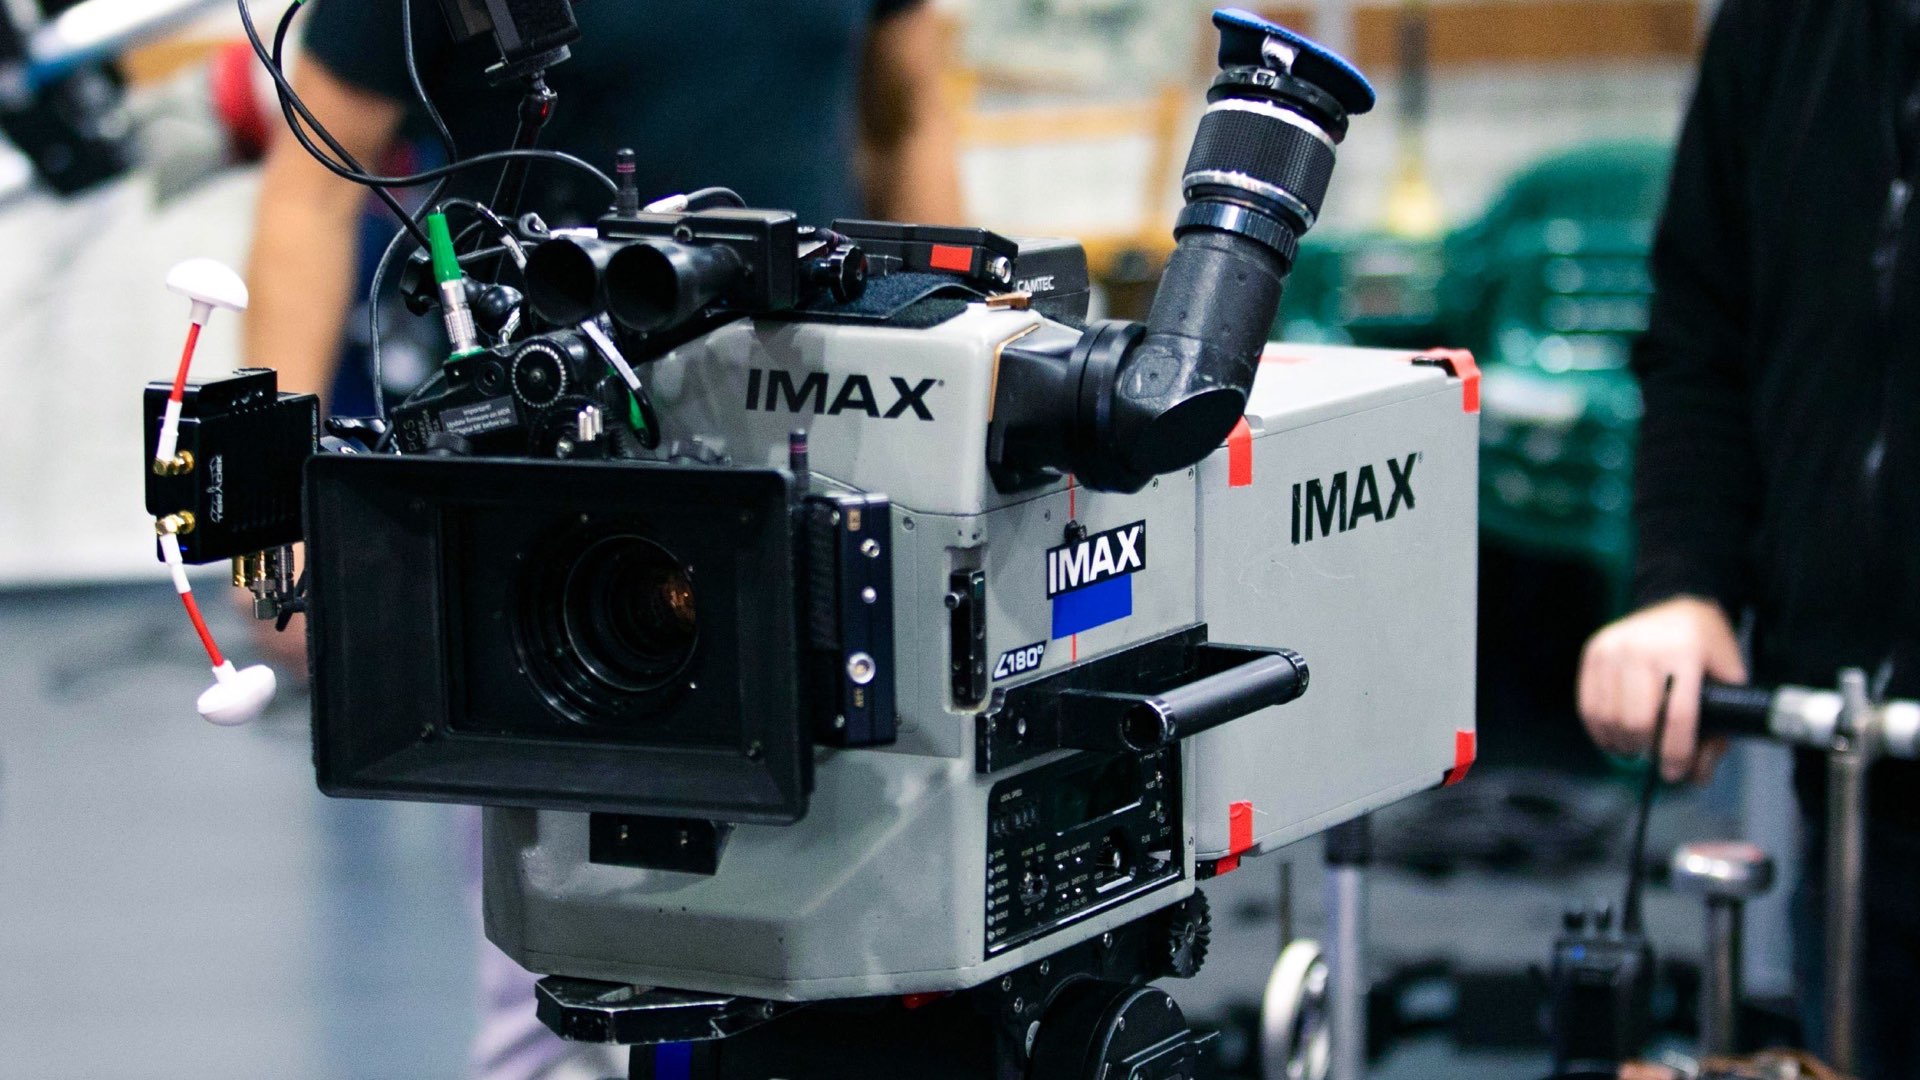 IMAX Filmmaking: What is it like to Shoot on an IMAX Film Camera? -  Y.M.Cinema Magazine